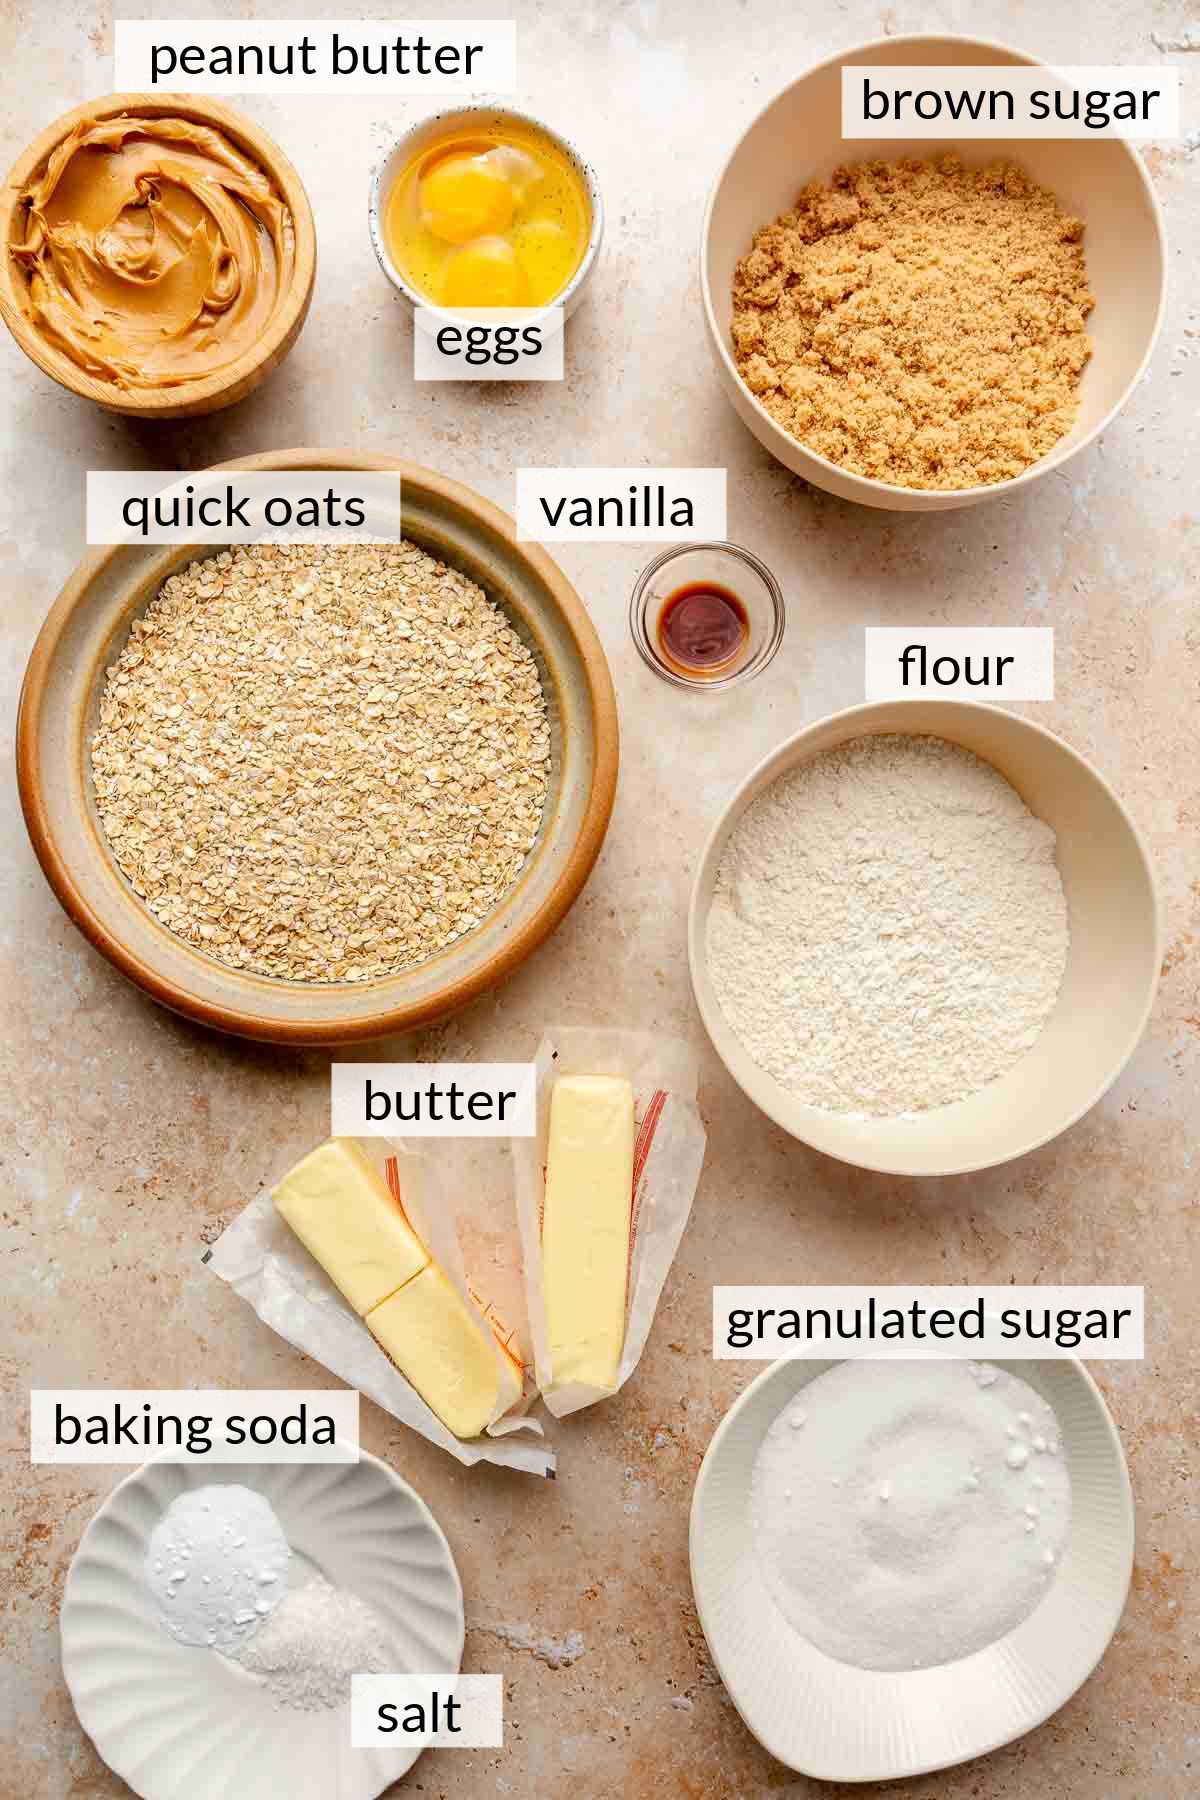 Quick oats, flour, sugar, eggs, peanut butter and salt divided into small bowls.